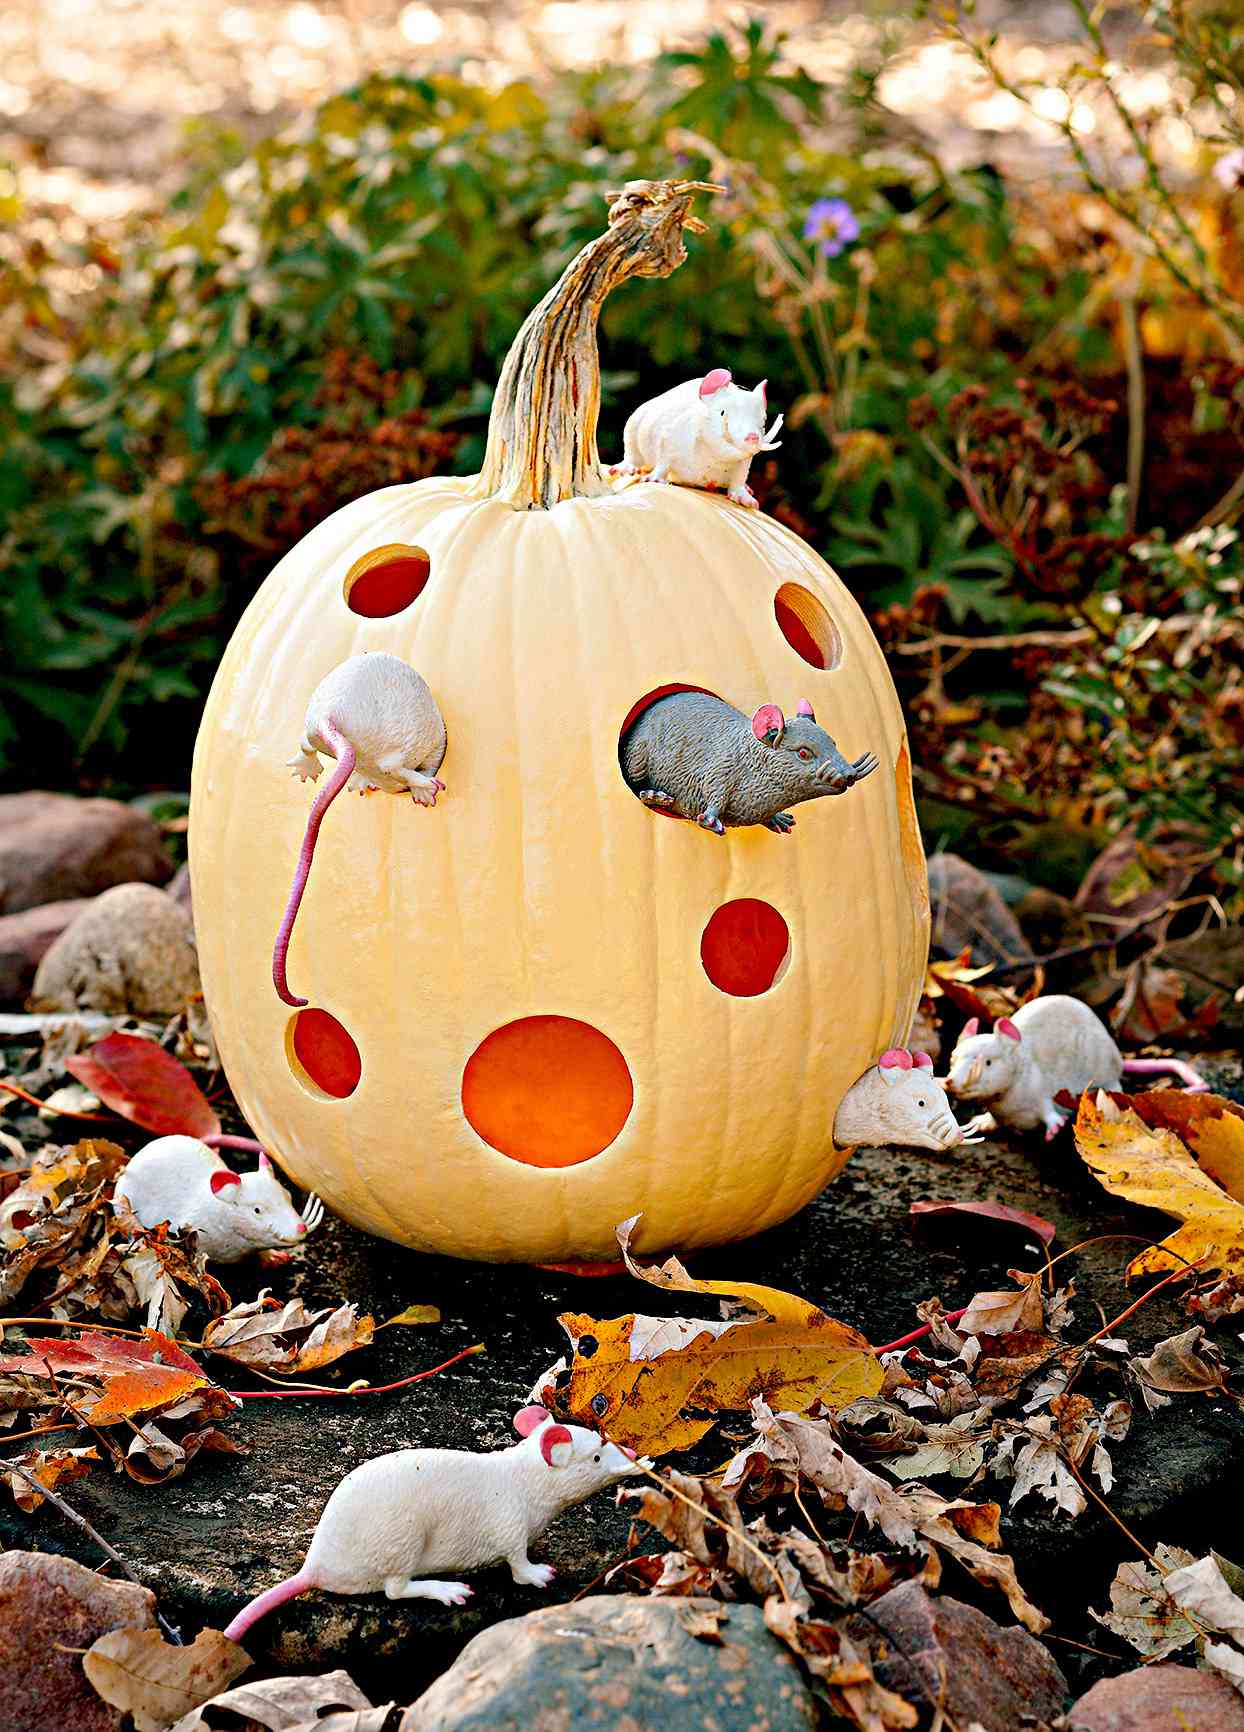 Yellow pumpkin carved to look like cheese with mice